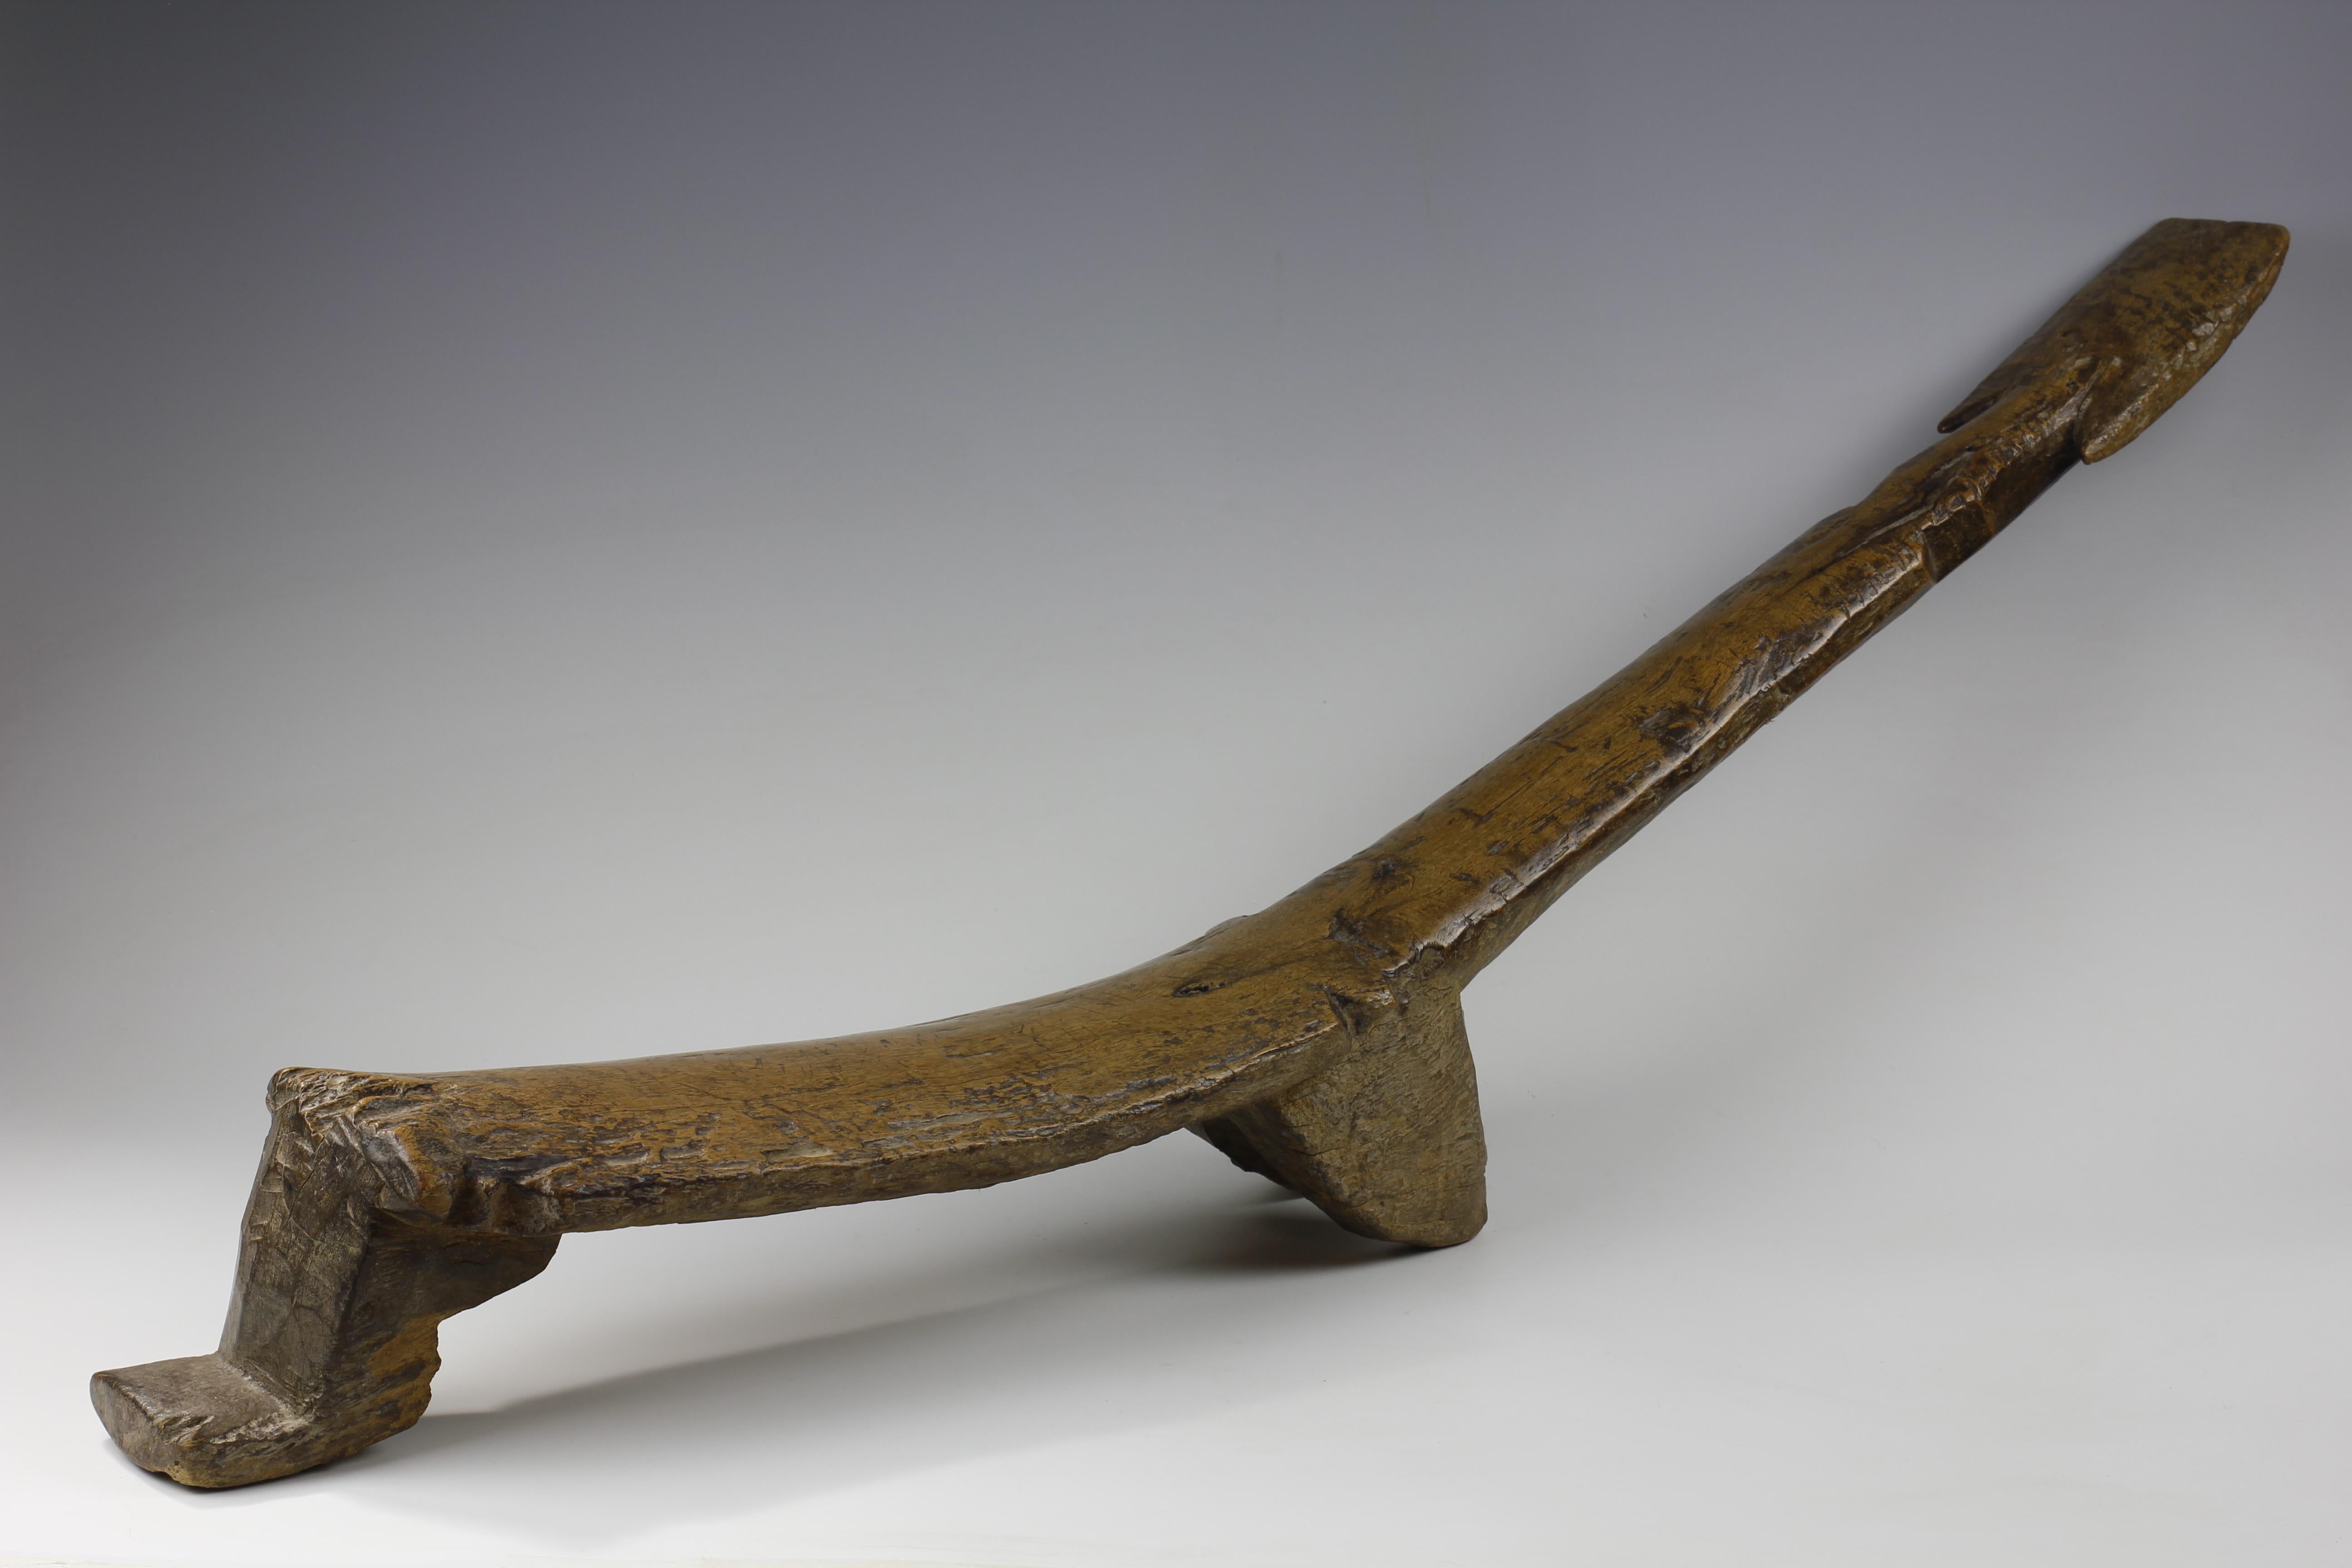 With a low seat supported by two splayed legs, this Lobi backrest from Burkina Faso exhibits a wonderful form with a long, reclining back support. Throughout, the surface of the piece has a deep, glossy patina. 

Pieces such as this were also